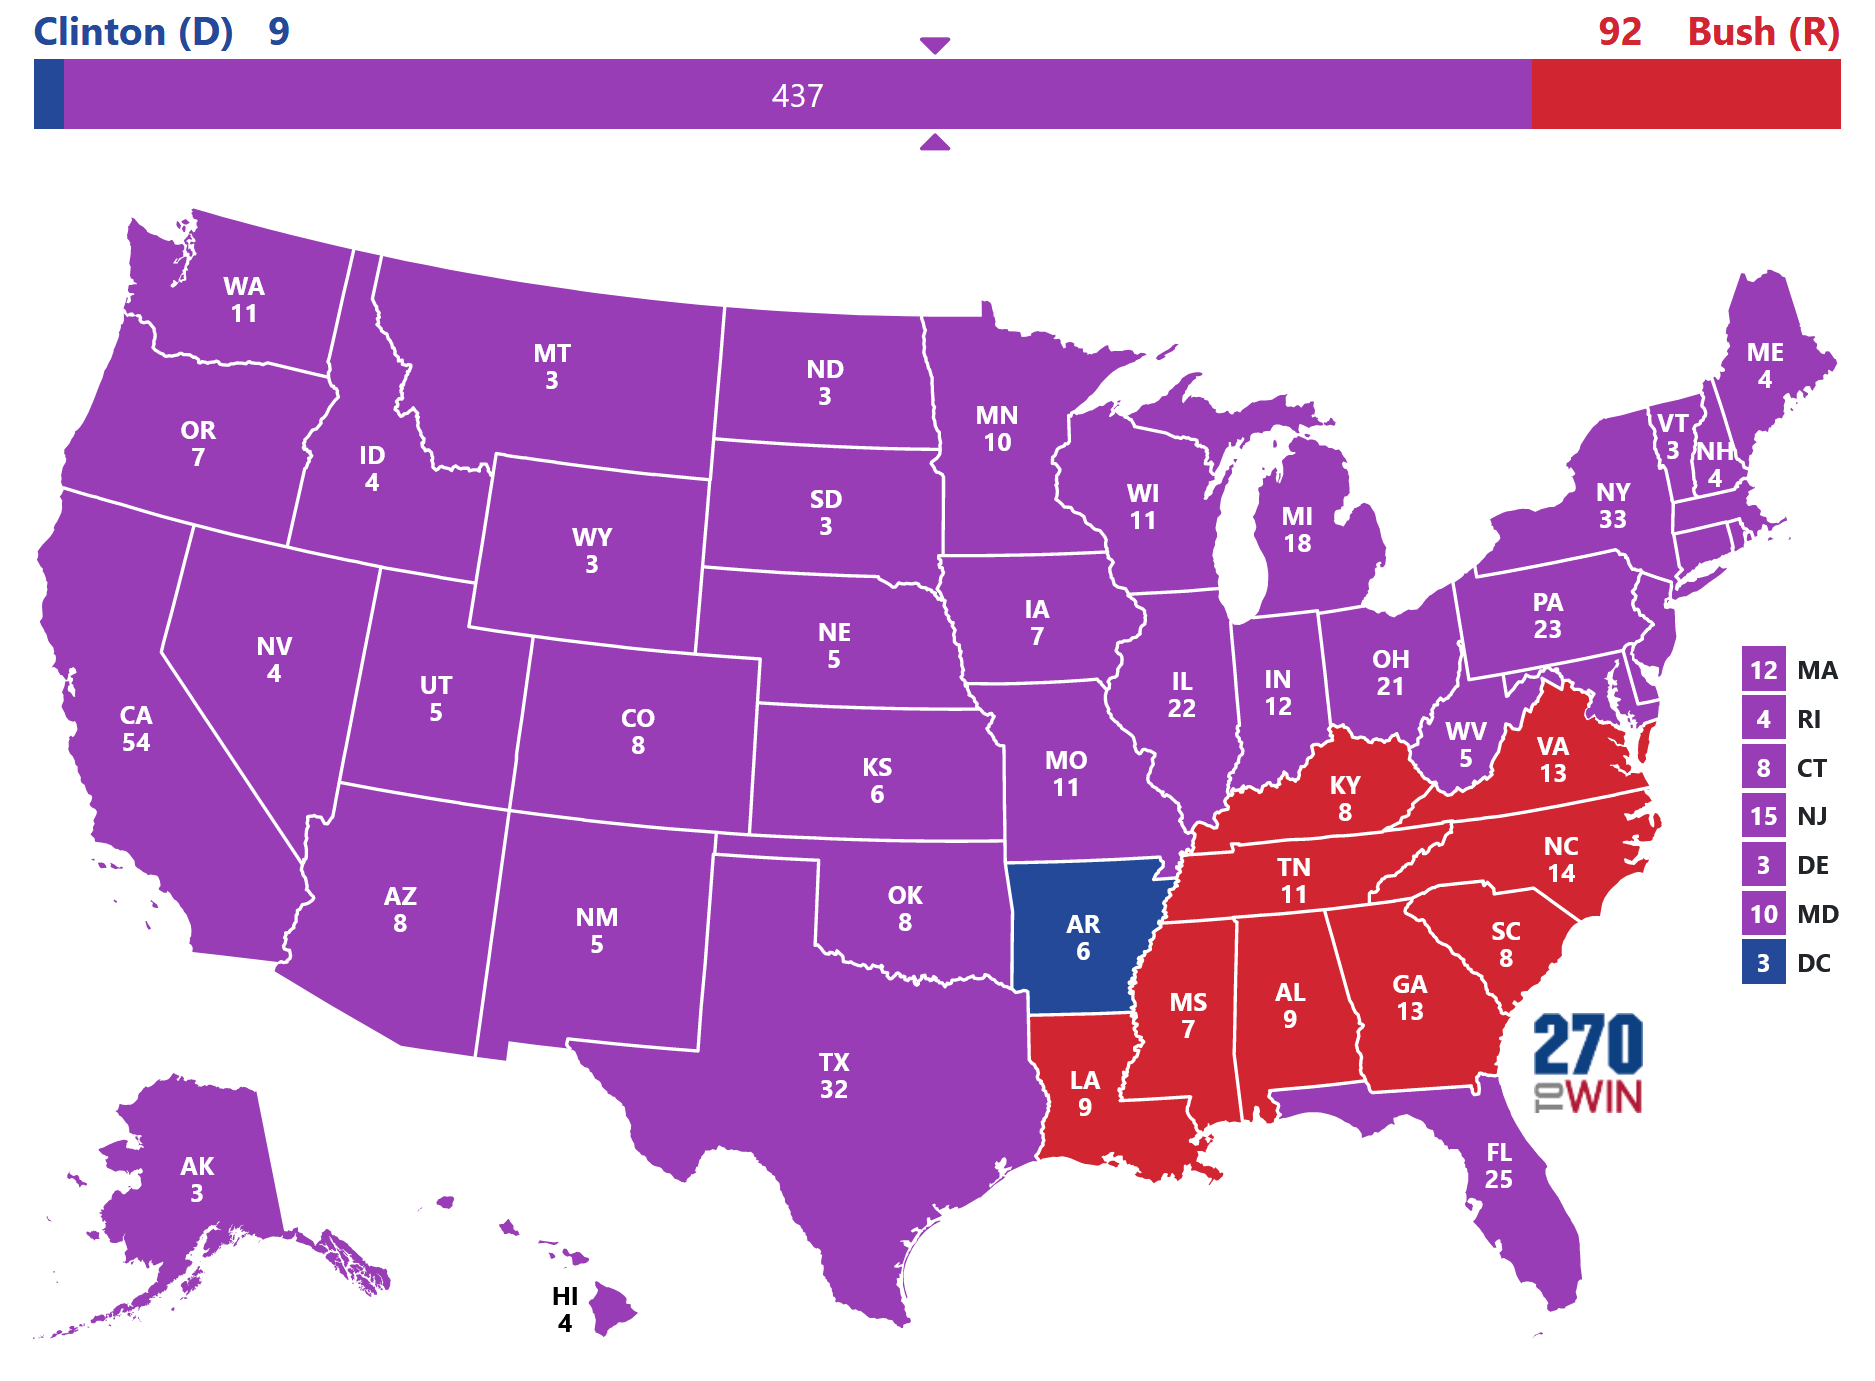 Perot's best-case electoral map assuming a uniform swing.